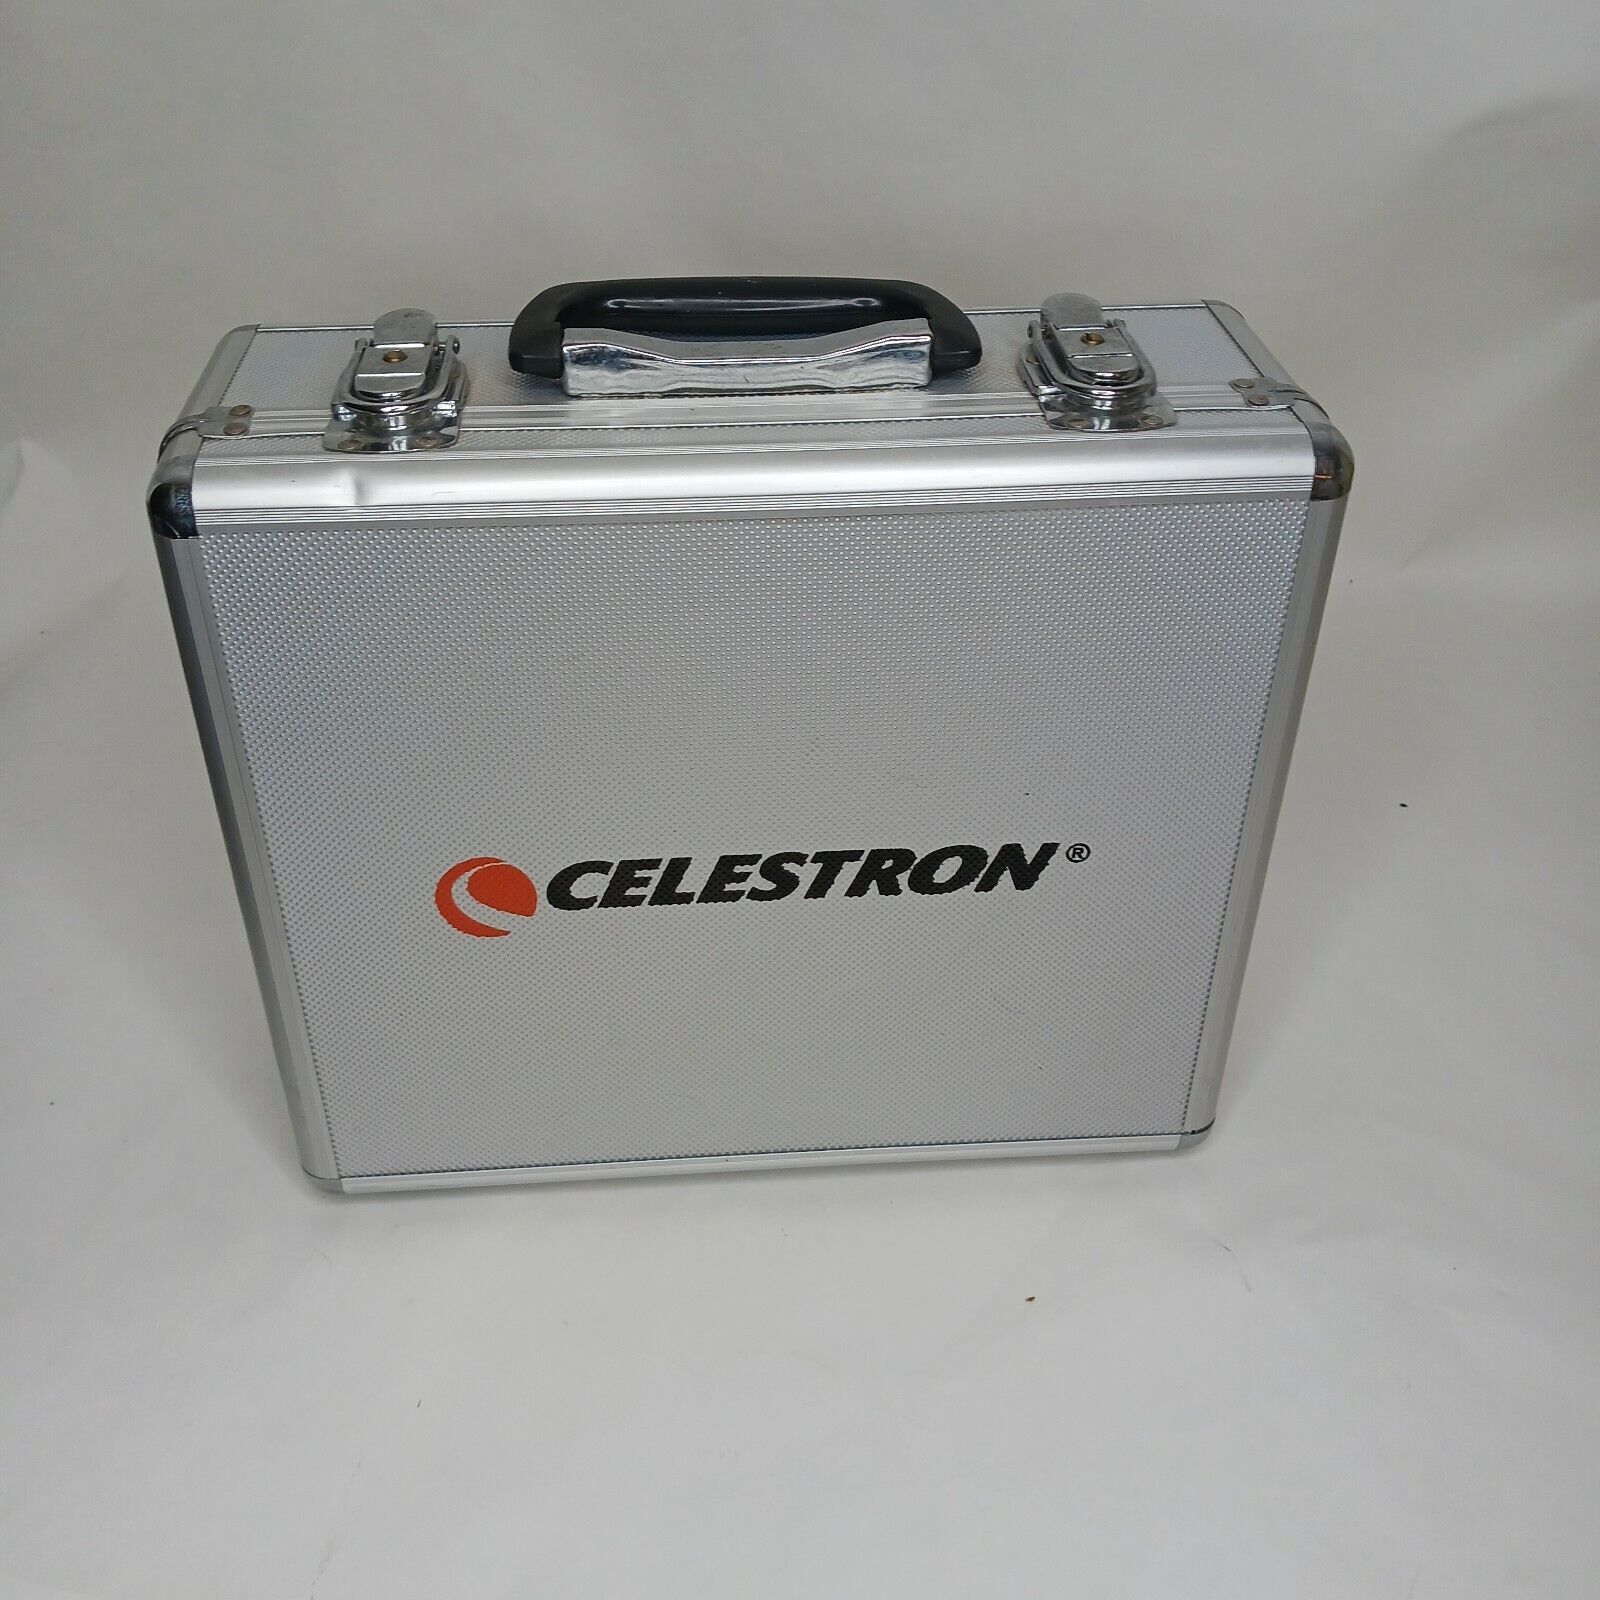 Celestron Accessory Kit Plossl Eyepieces, 2x Barlow,  Cleaning Case.  Filter Set